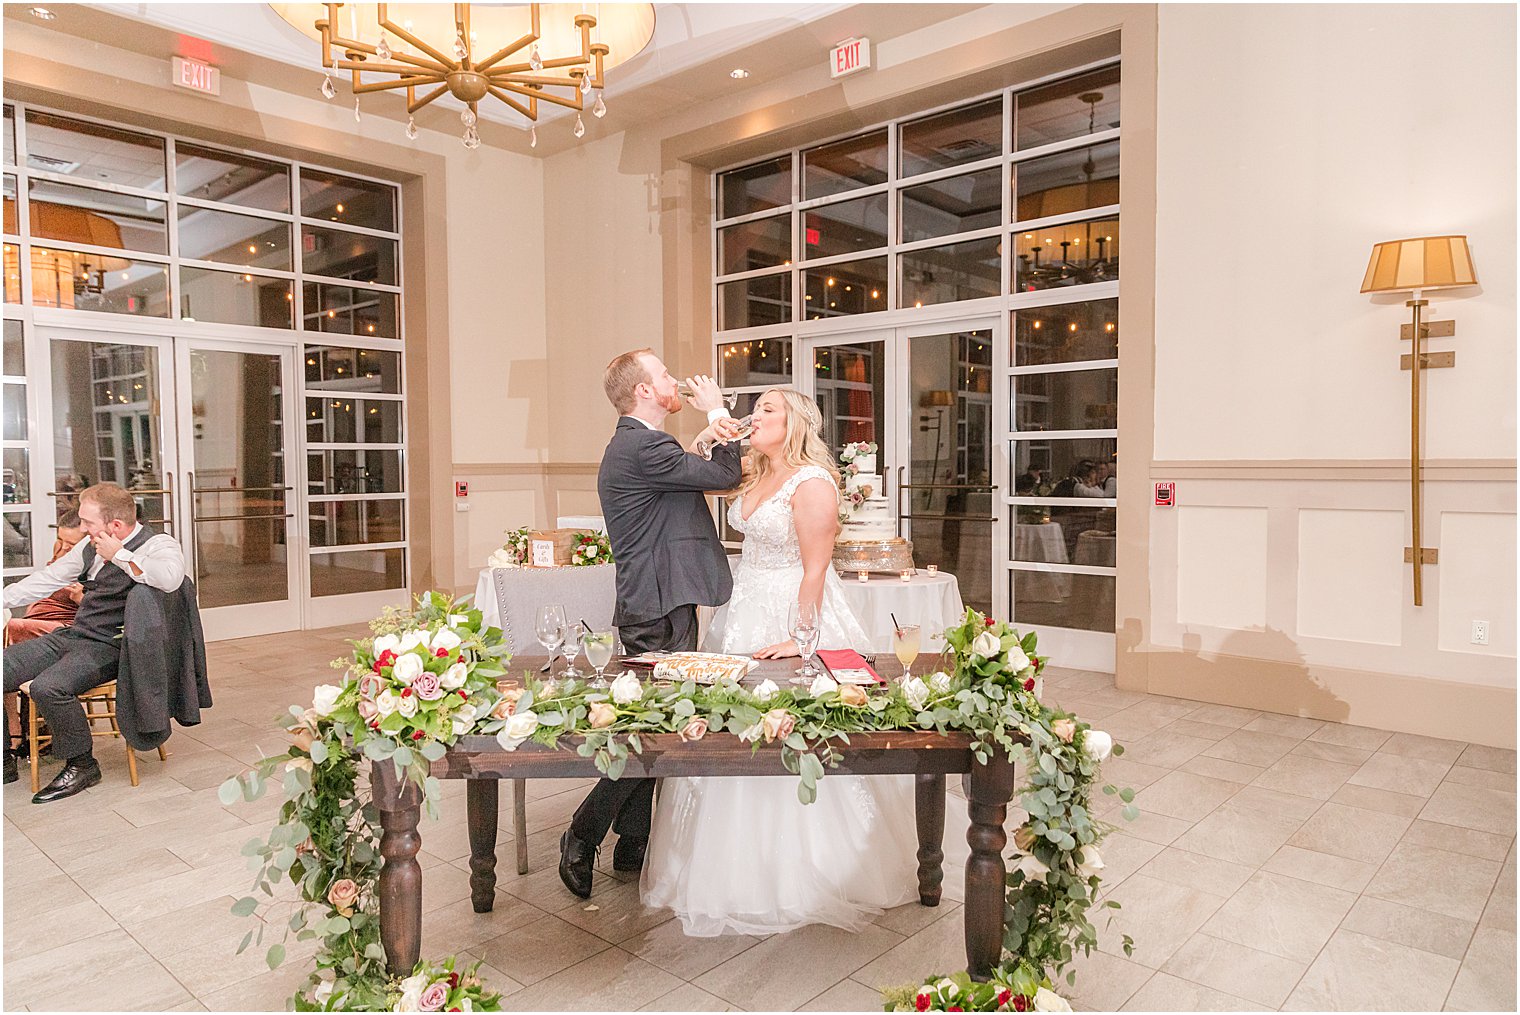 newlyweds toast with wine glasses intertwined